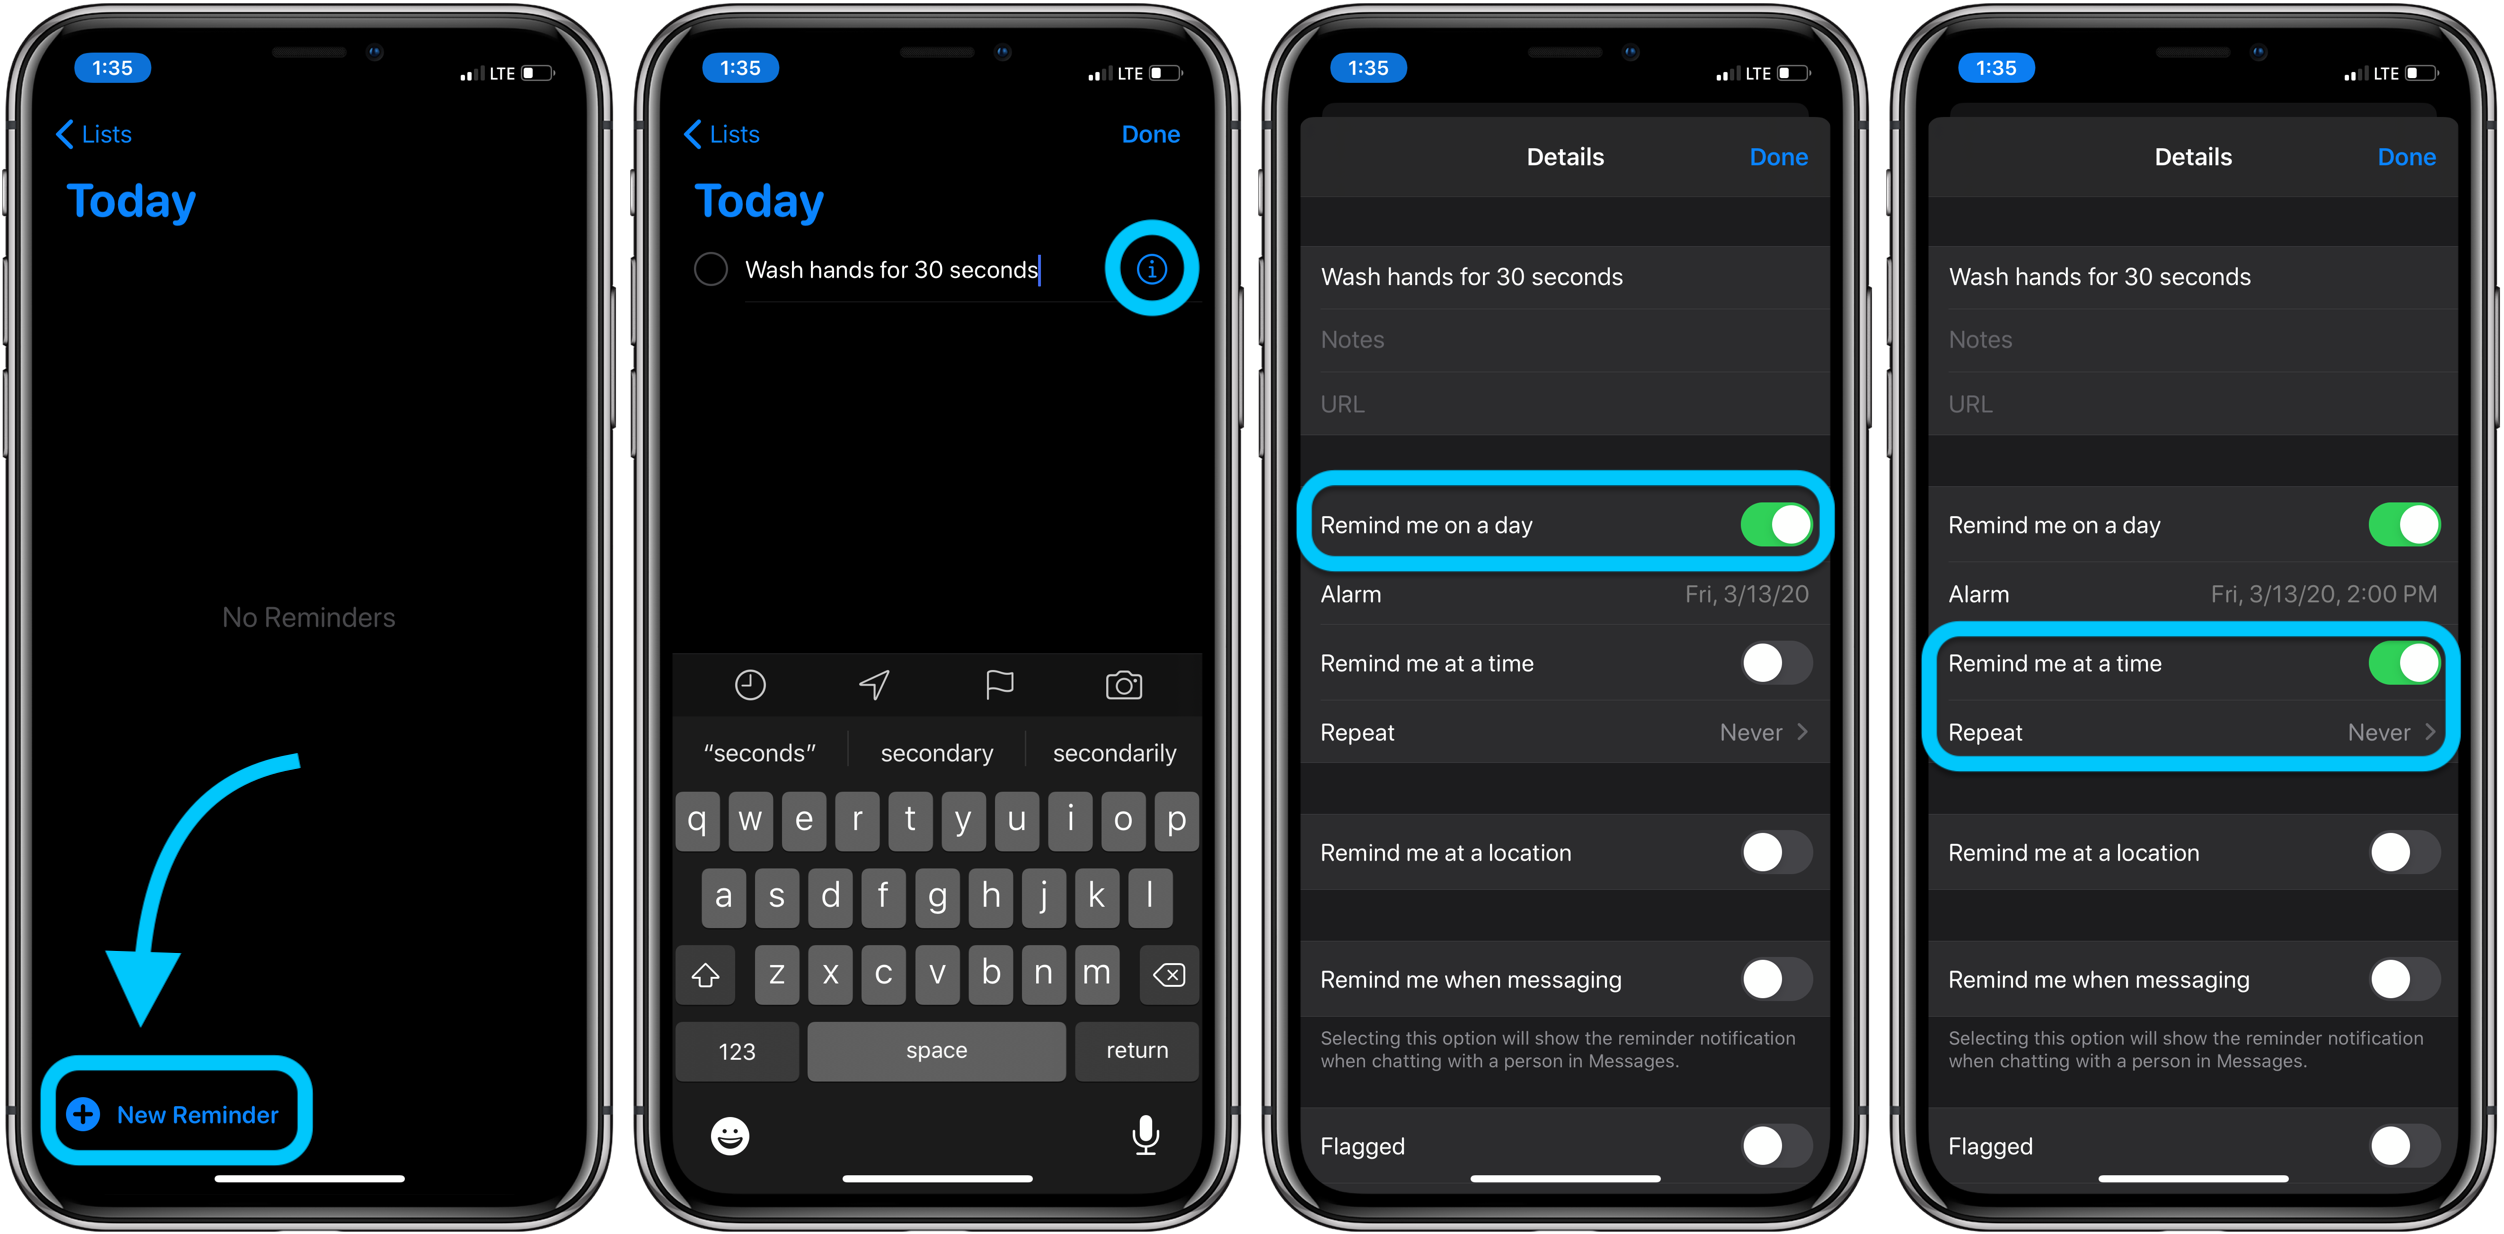 How to set up hourly reminders on iPhone and Apple Watch to wash your hands and stop touching your face